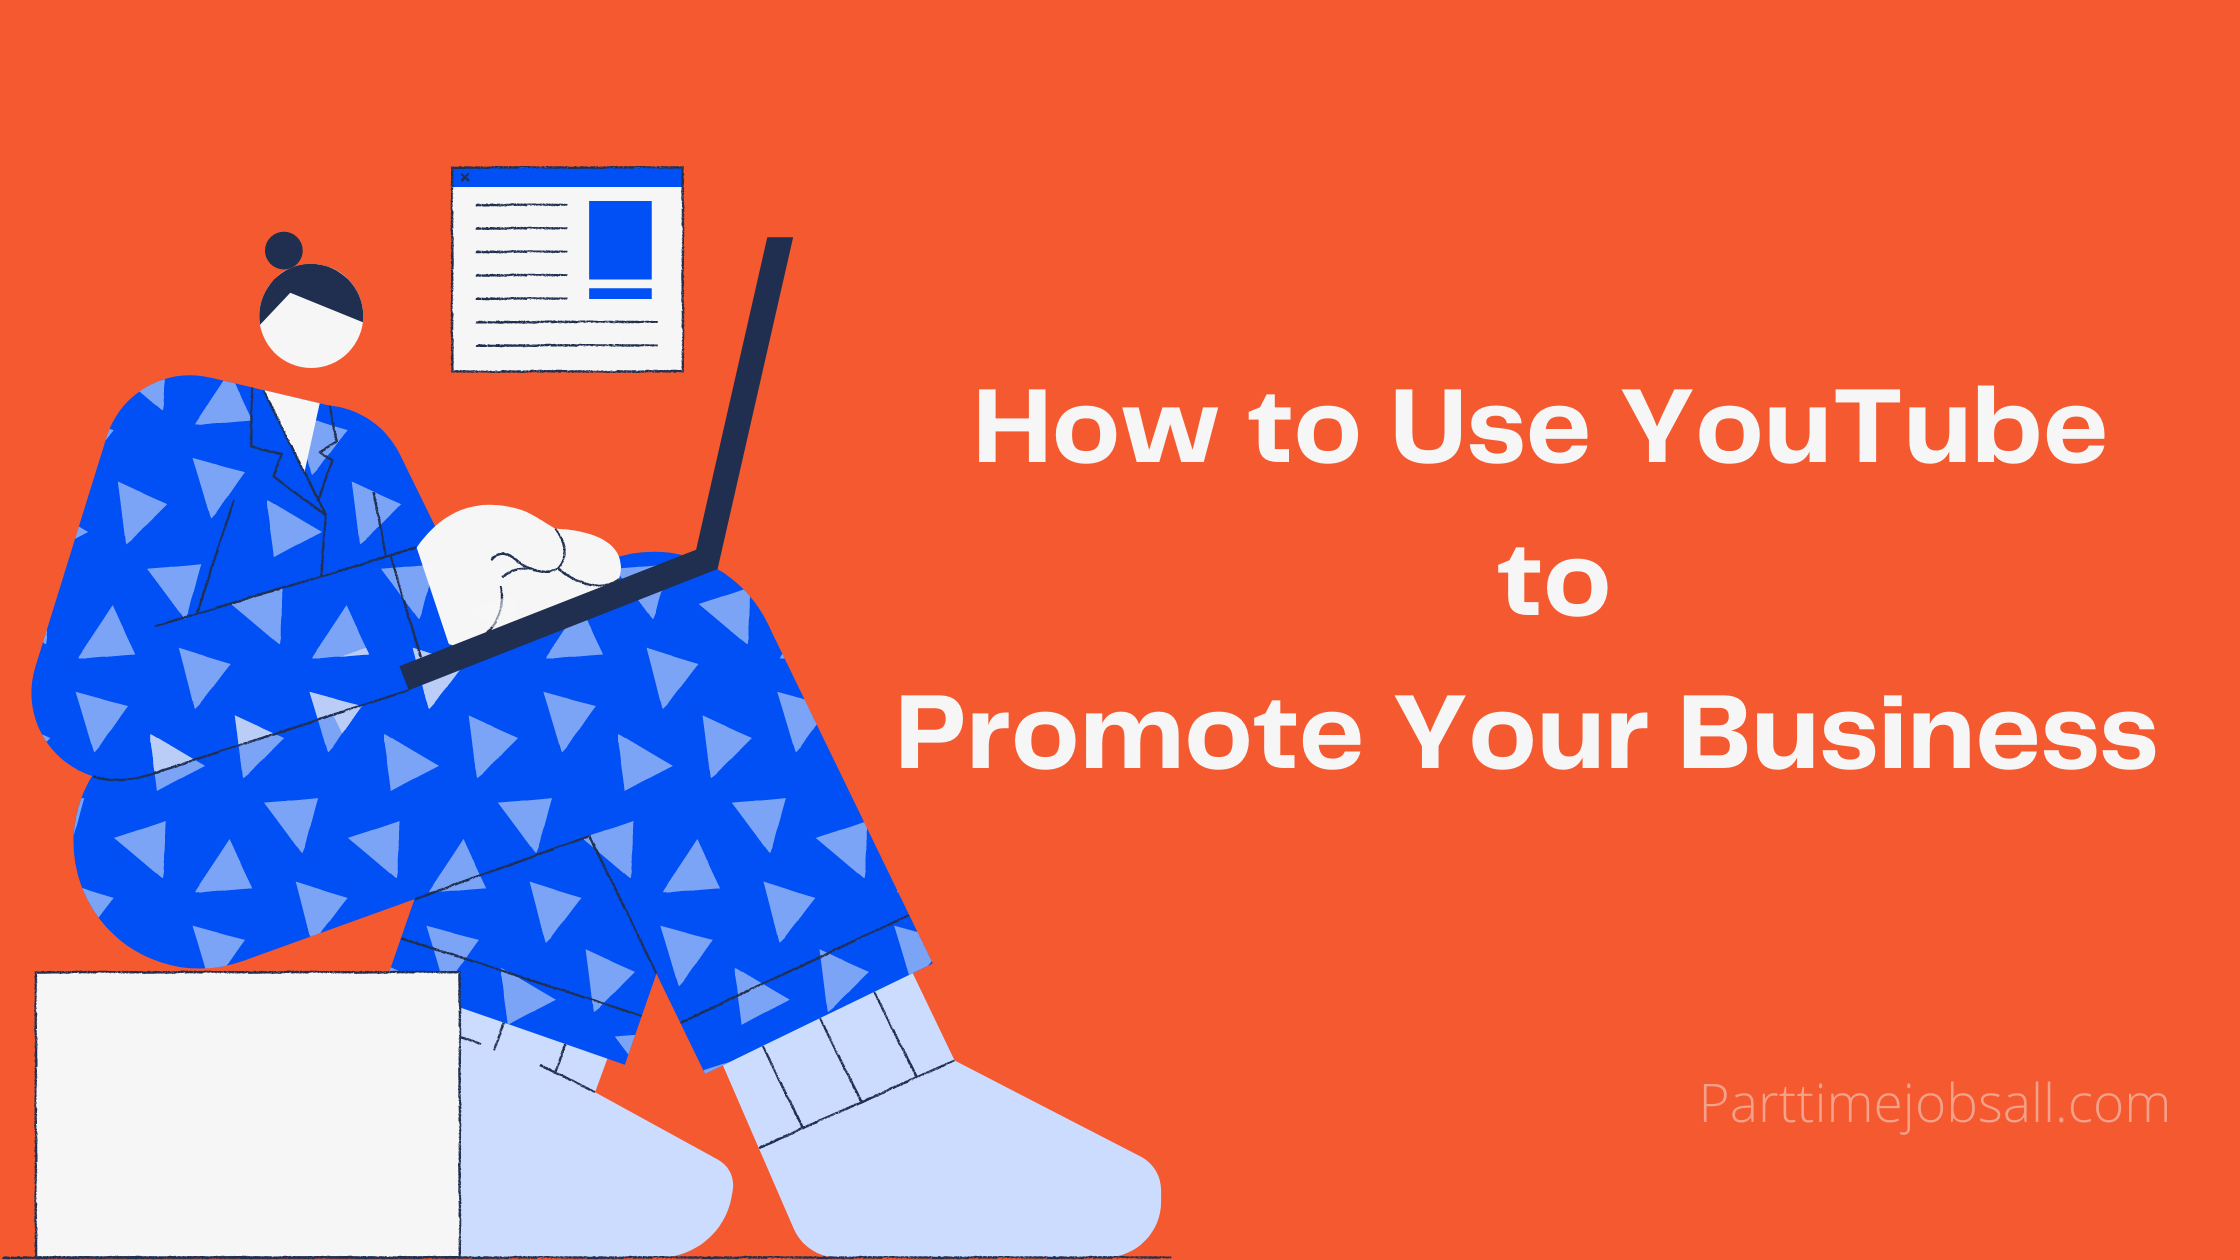 How to Use YouTube to Promote Your Business?